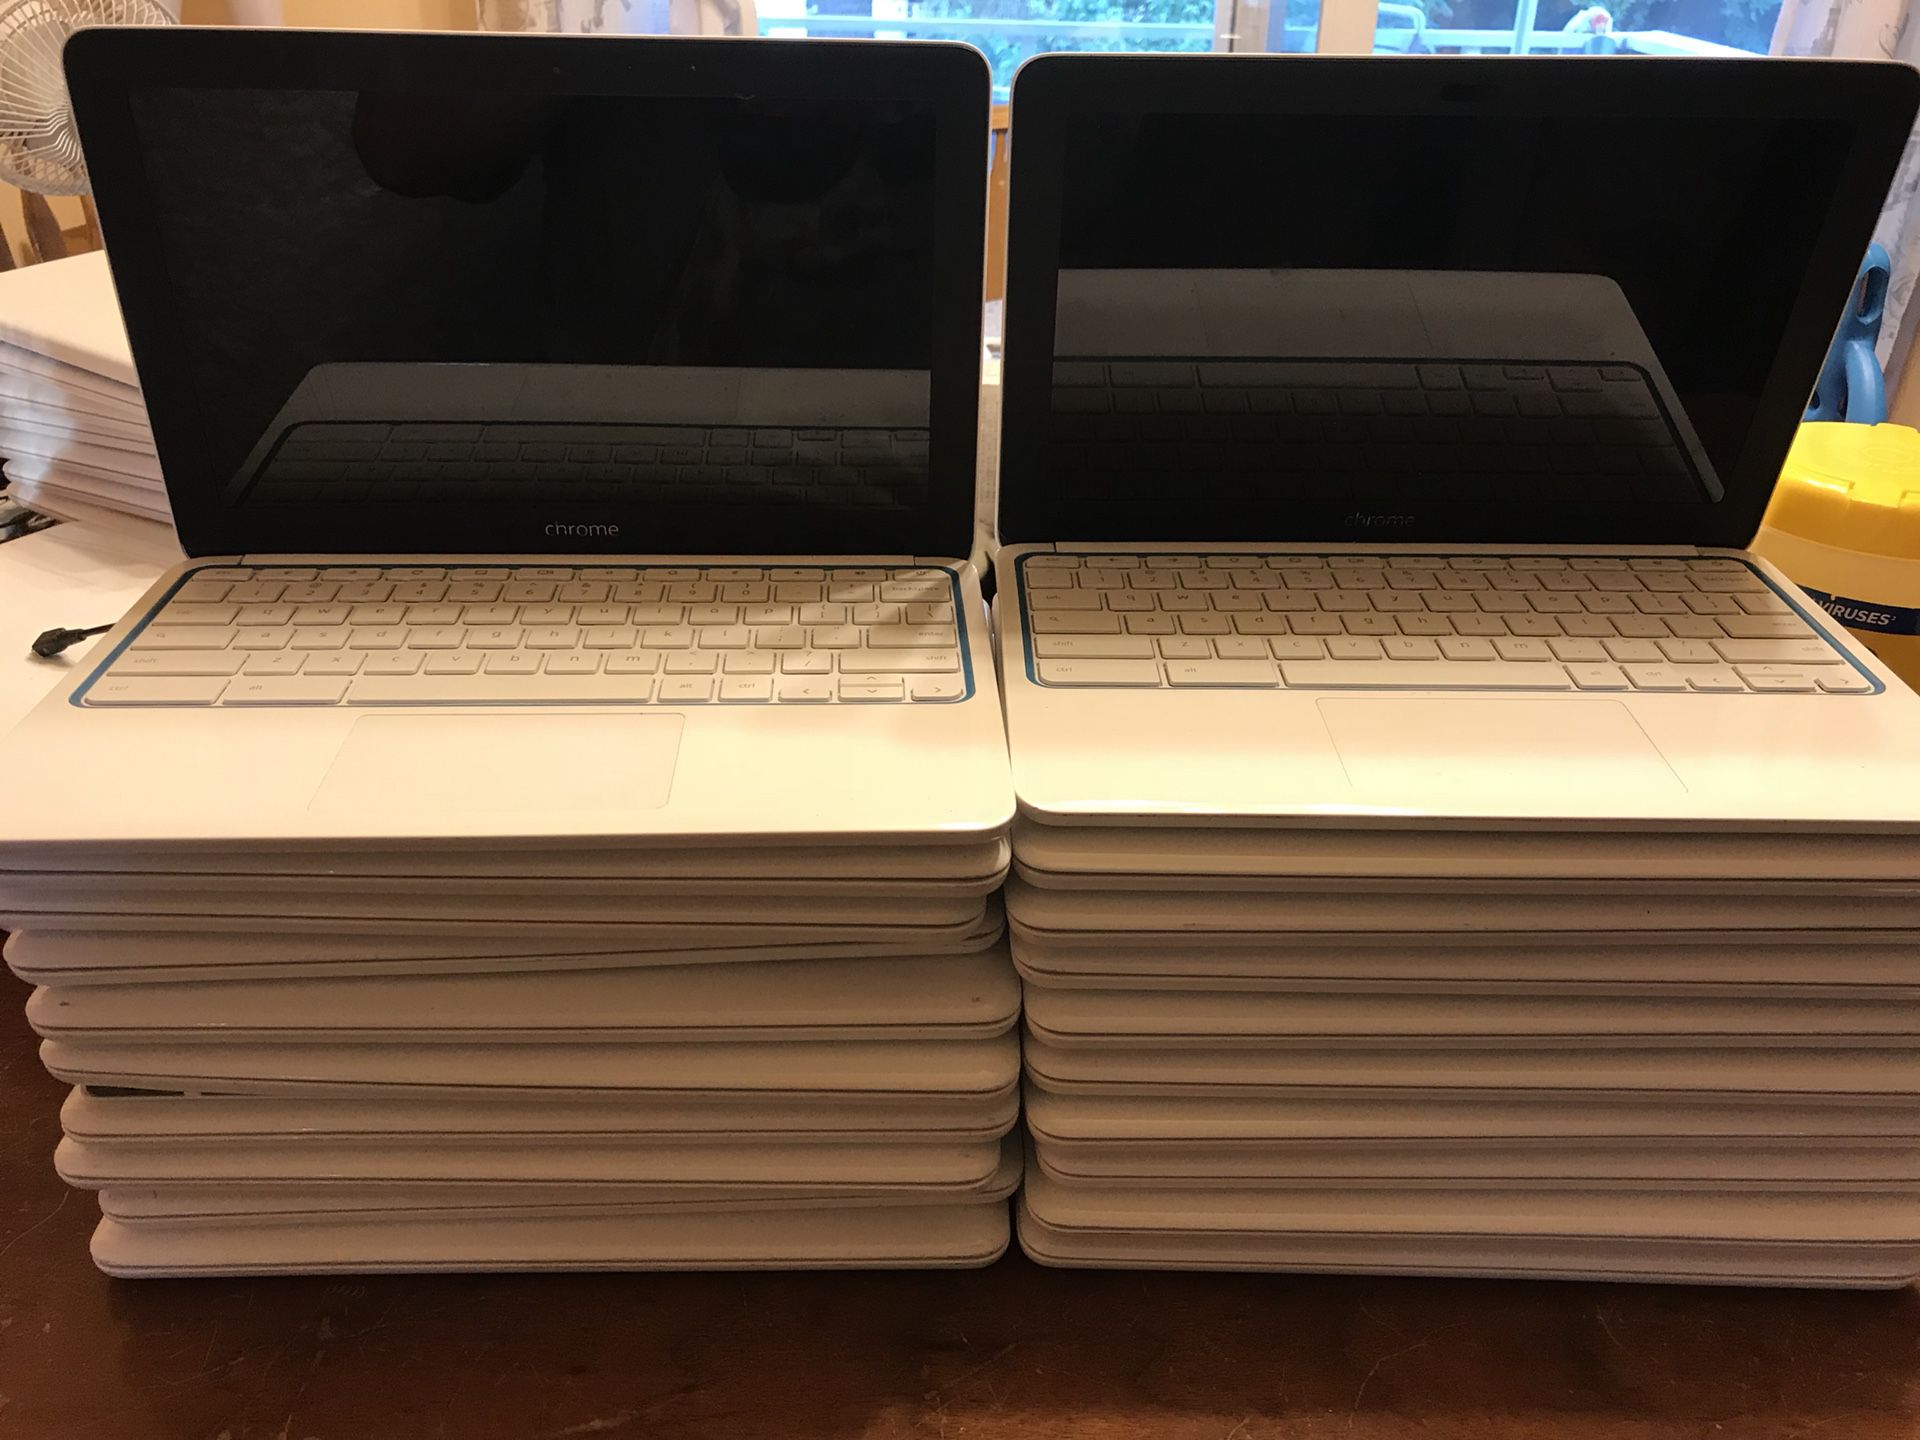 20 x HP chromebook 11 Google Laptop 1.7Ghz 16gb SSD 2gb Ram 11.6” Sell as parts, power won’t turn on Each one only $12 for each one. School district